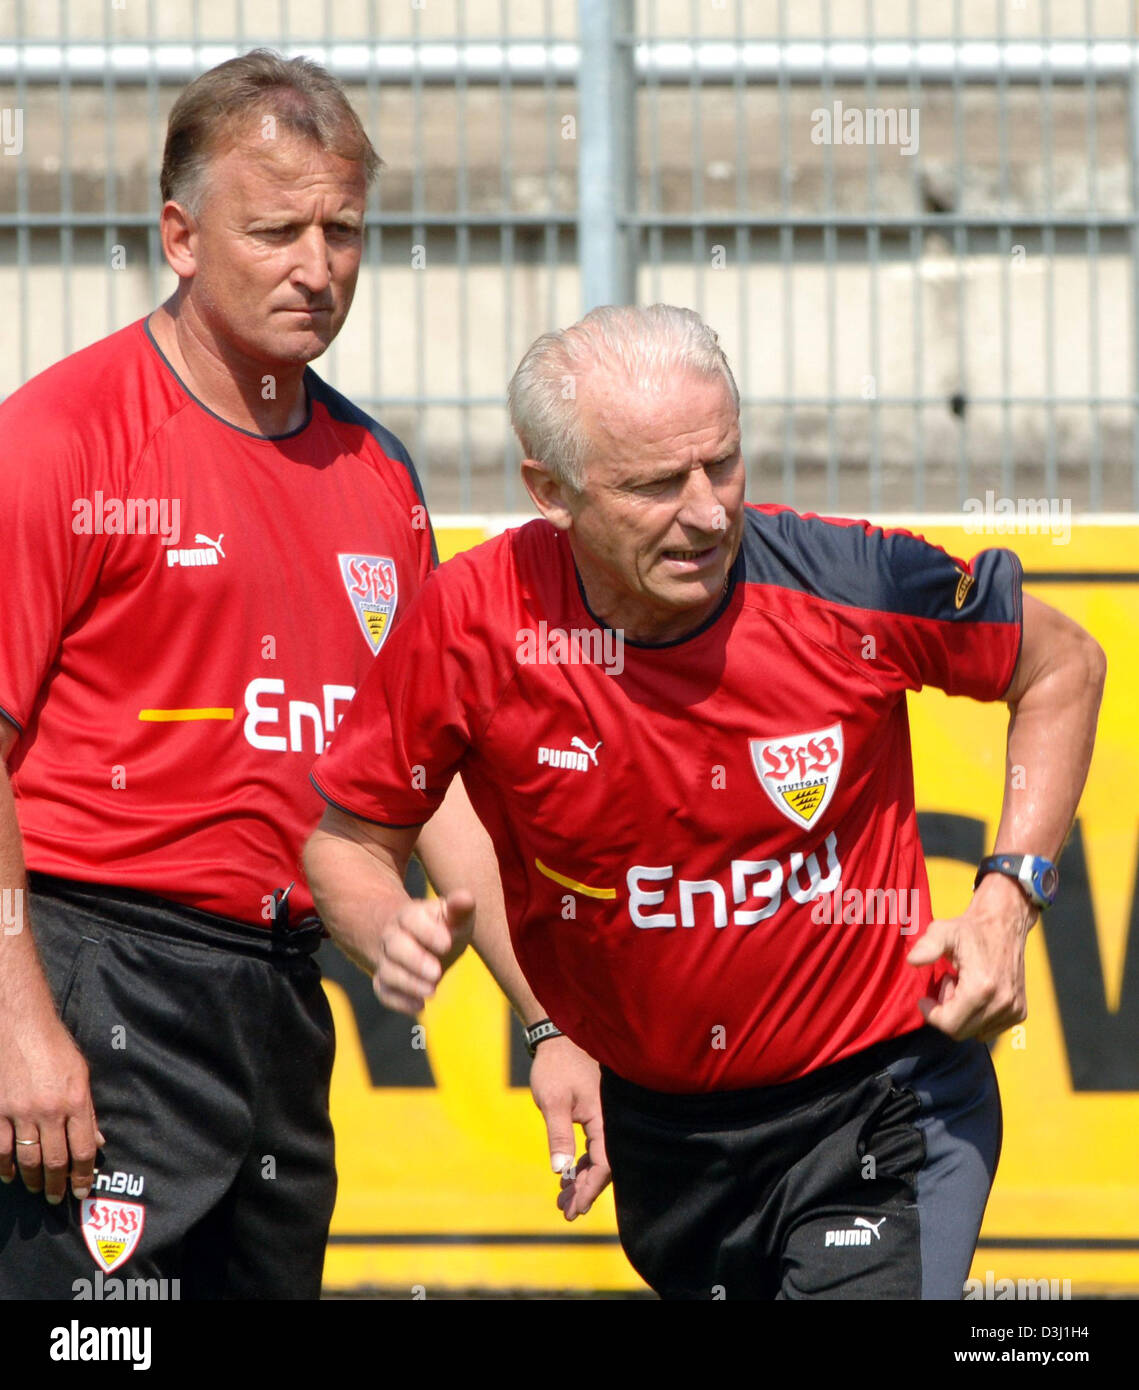 (dpa) - Head Coach of German Bundesliga club VfB Stuttgart Italian Giovanni Trapattoni (R) shows a move to his players during his first training session in Stuttgart, Germany, 27 June 2005. On Trappatoni's left side stands his Assistant Coach German soccer legend Andreas Brehme. Stock Photo